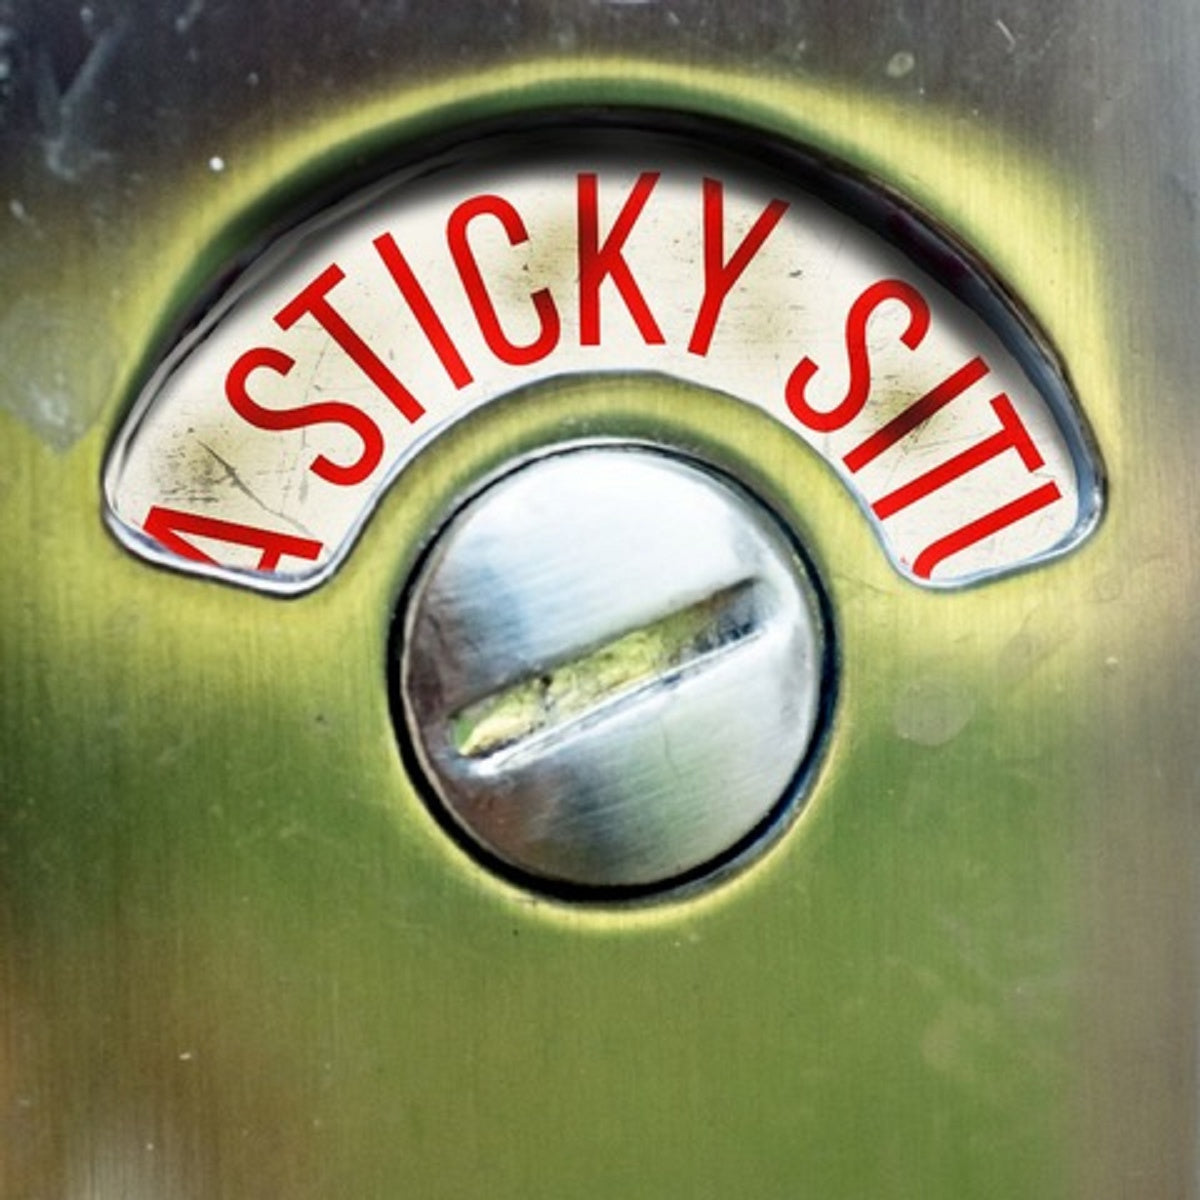 Another Day - 'A Sticky Situation'